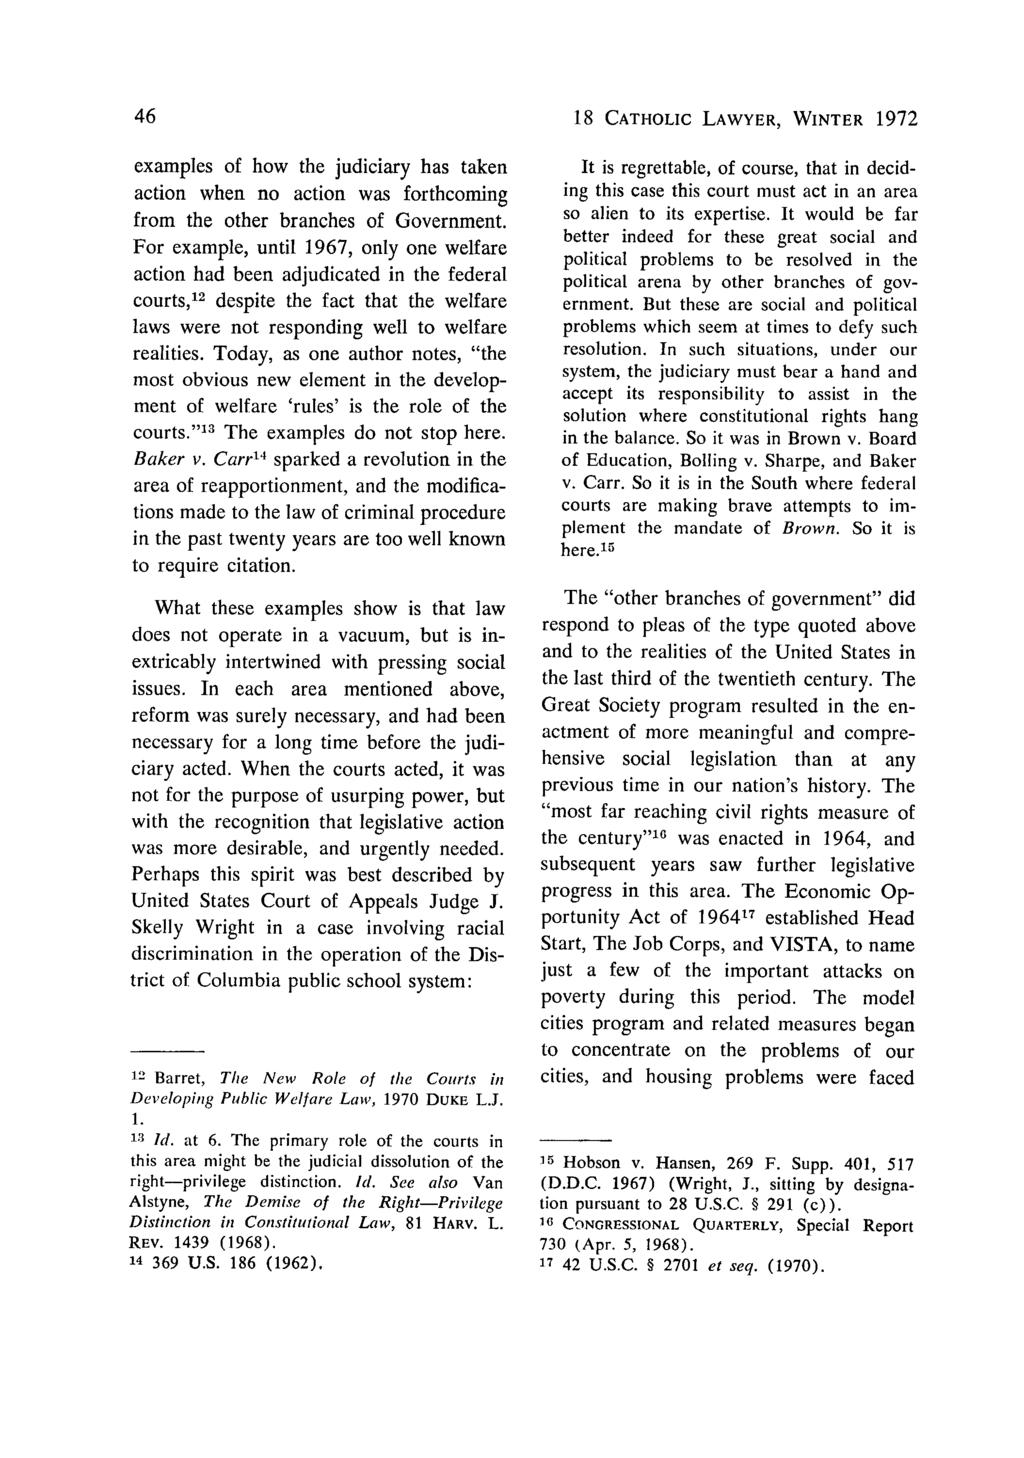 18 CATHOLIC LAWYER, WINTER 1972 examples of how the judiciary has taken action when no action was forthcoming from the other branches of Government.